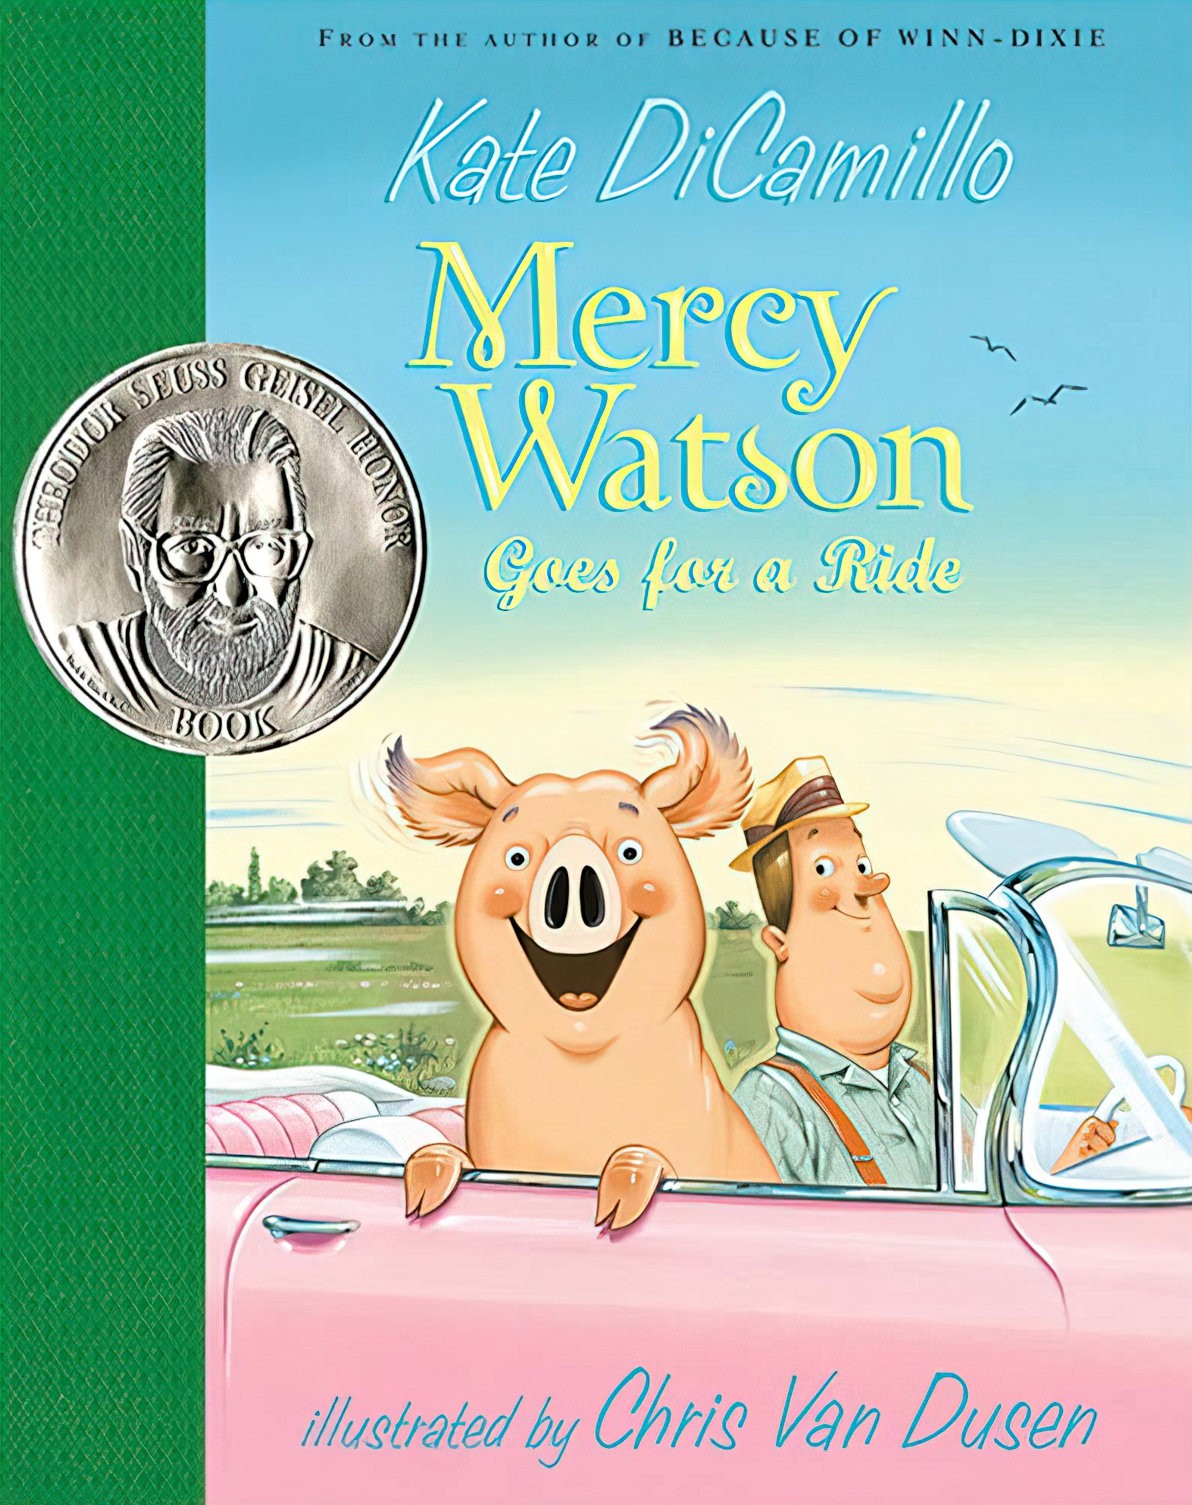 Mercy Watson Goes For A Ride by diCamillo and Van Dusen